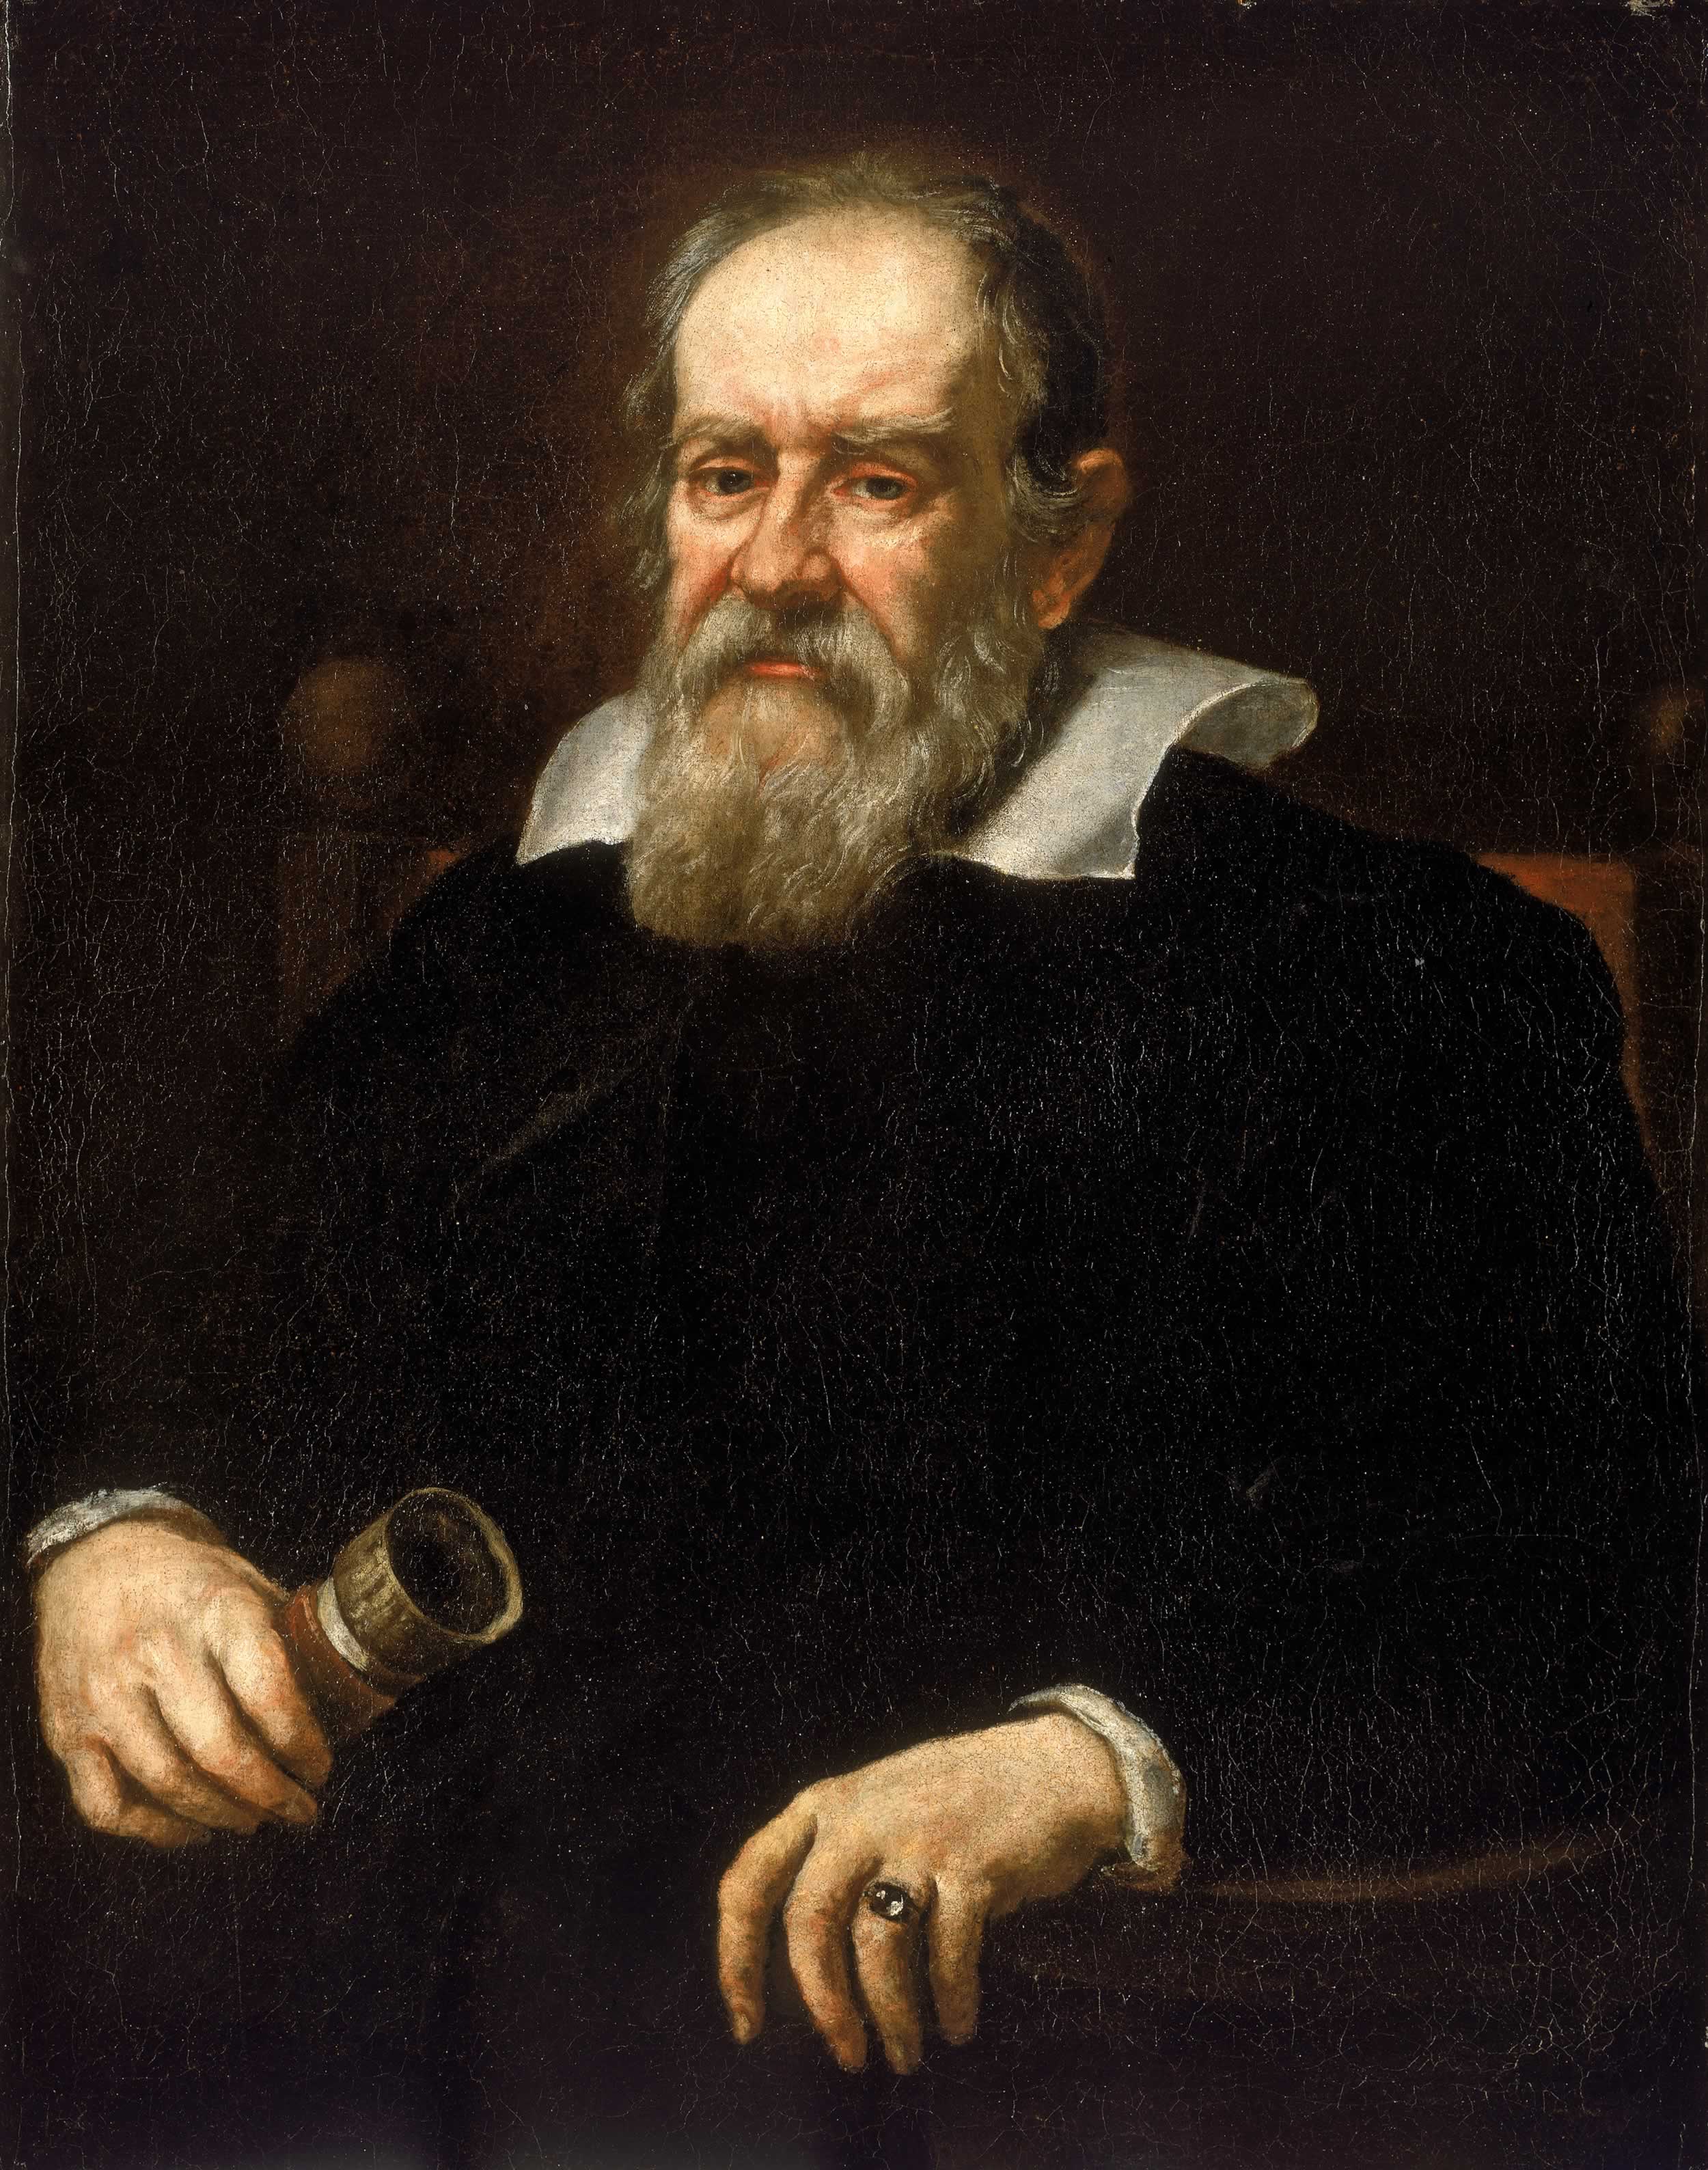 Galileo Galilei - "I'll prove the moon landing wasn't real! I'll look at for the landing site with my telescope!"